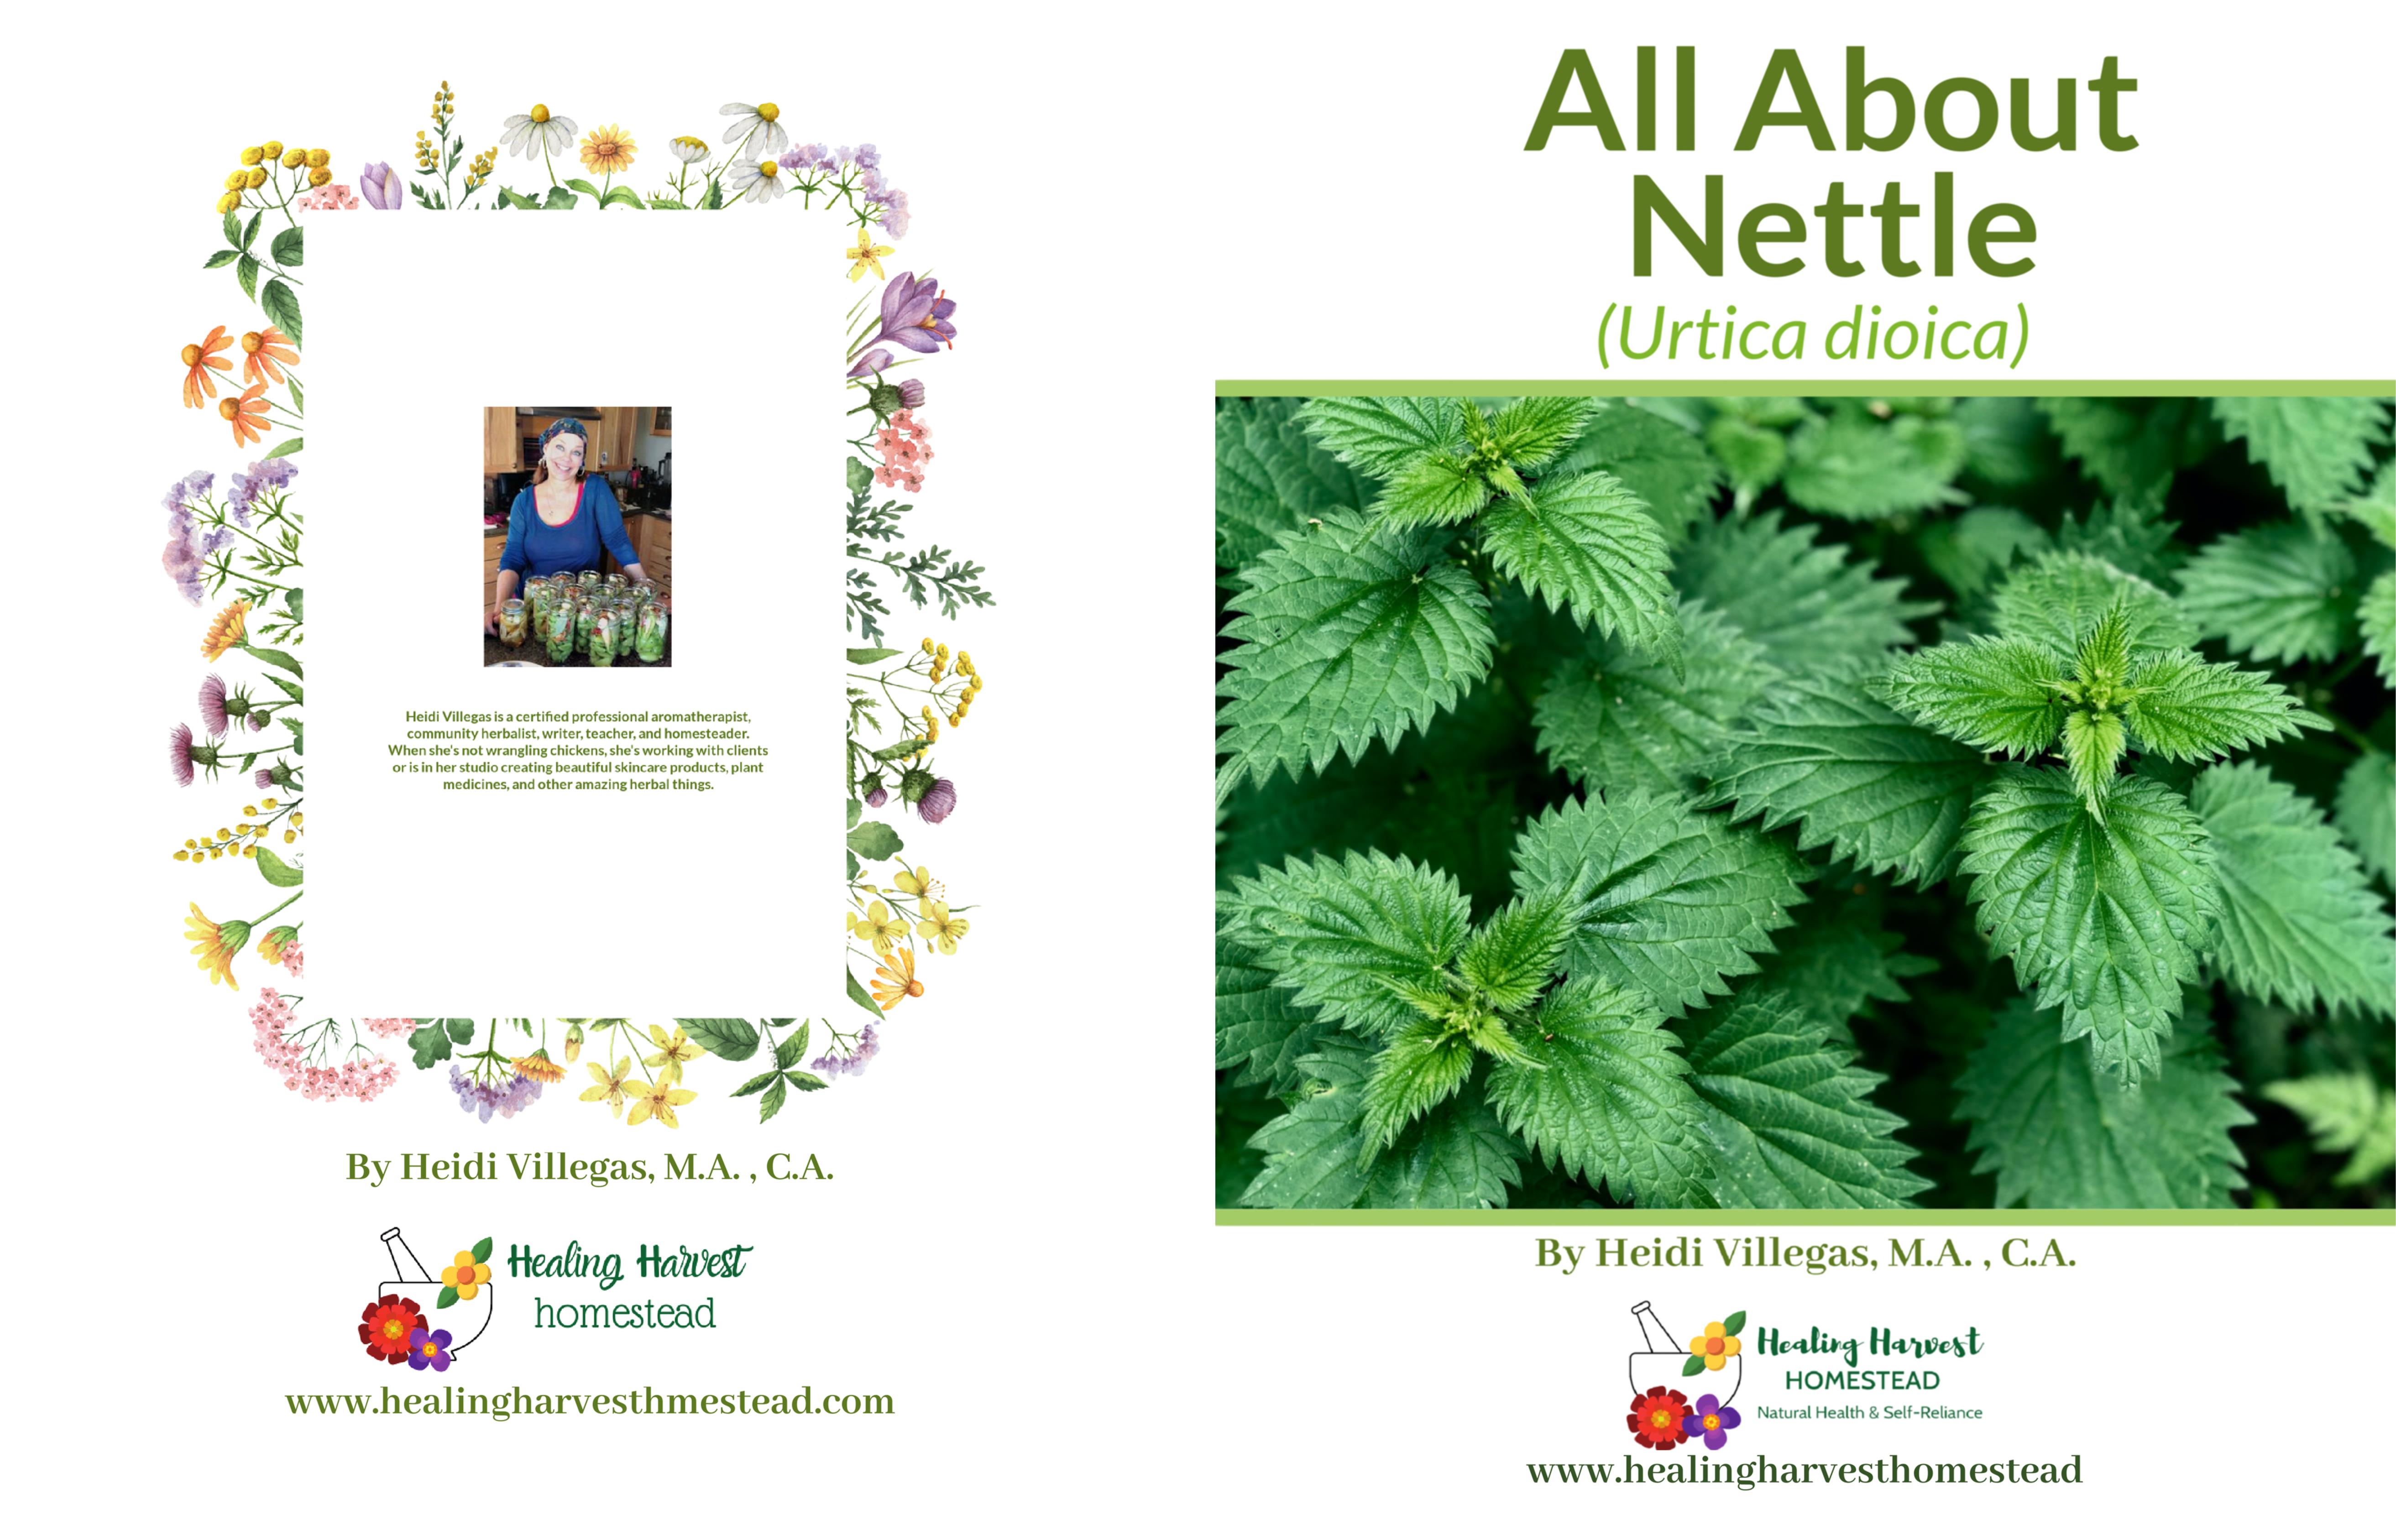 All About Nettle cover image